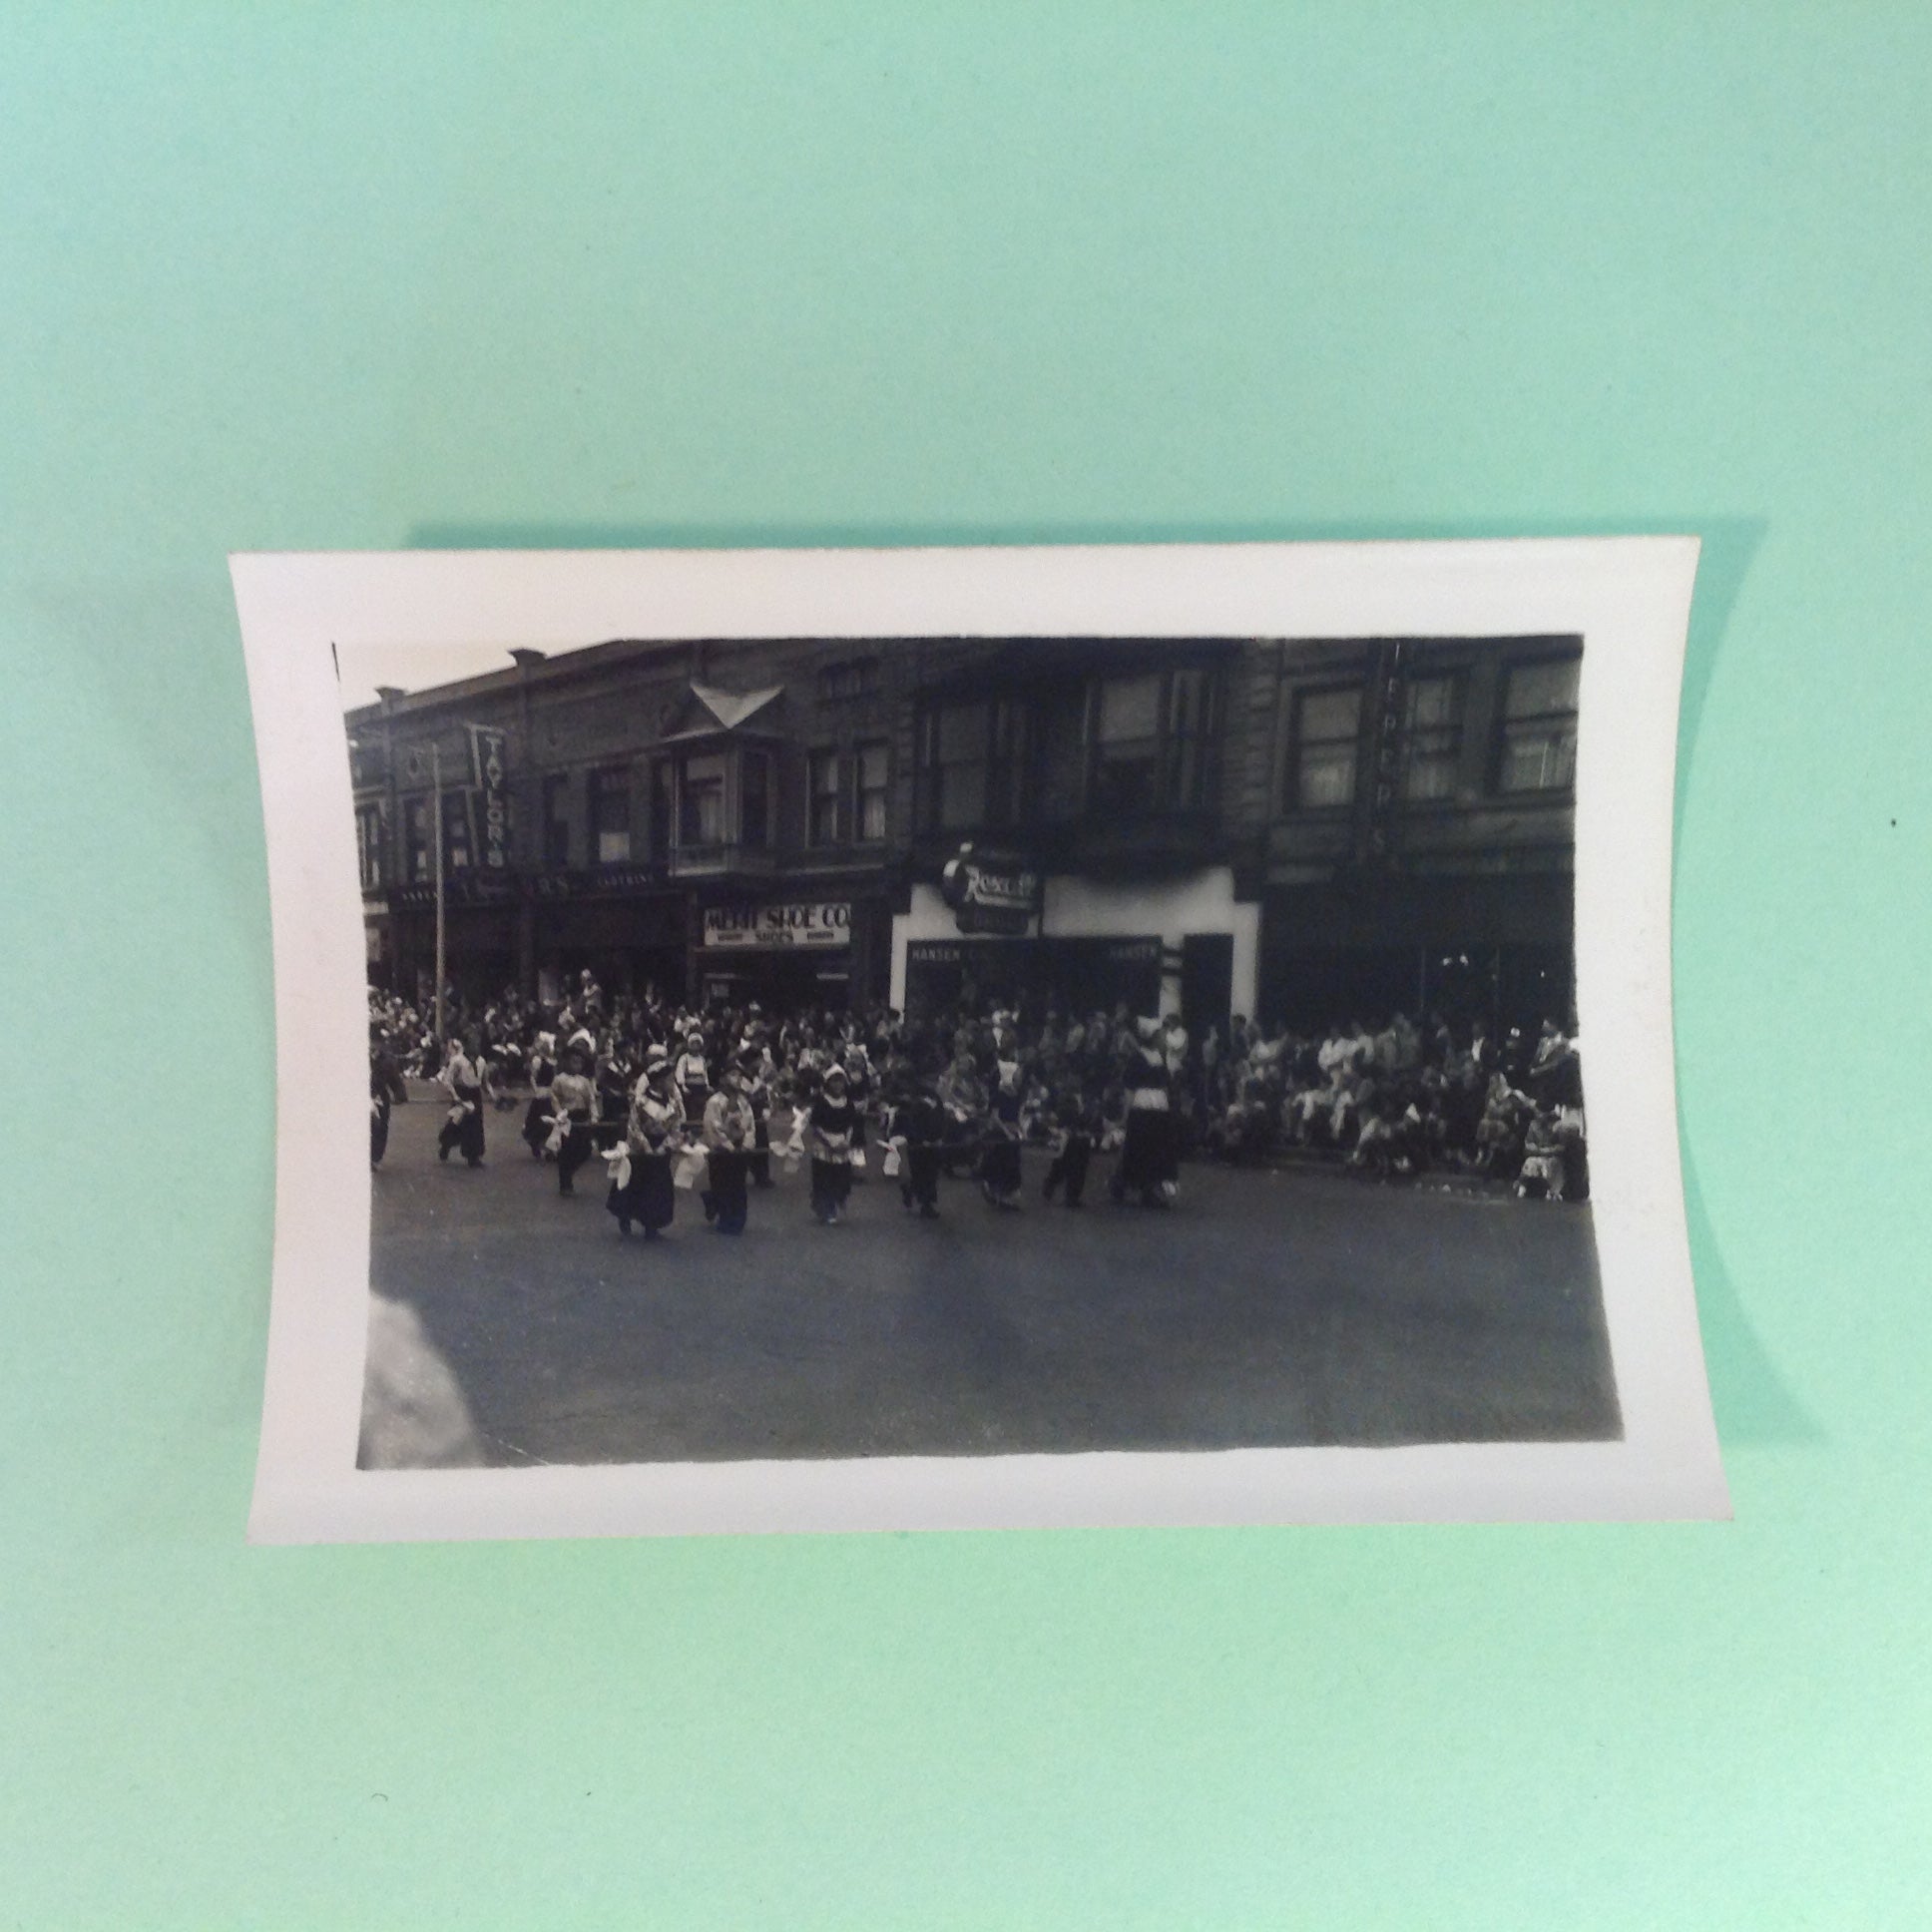 Vintage Mid Century B&W Photo Holland Michigan Tulip Festival Paraders March of the Little Dutch Children Past Rexall Drug